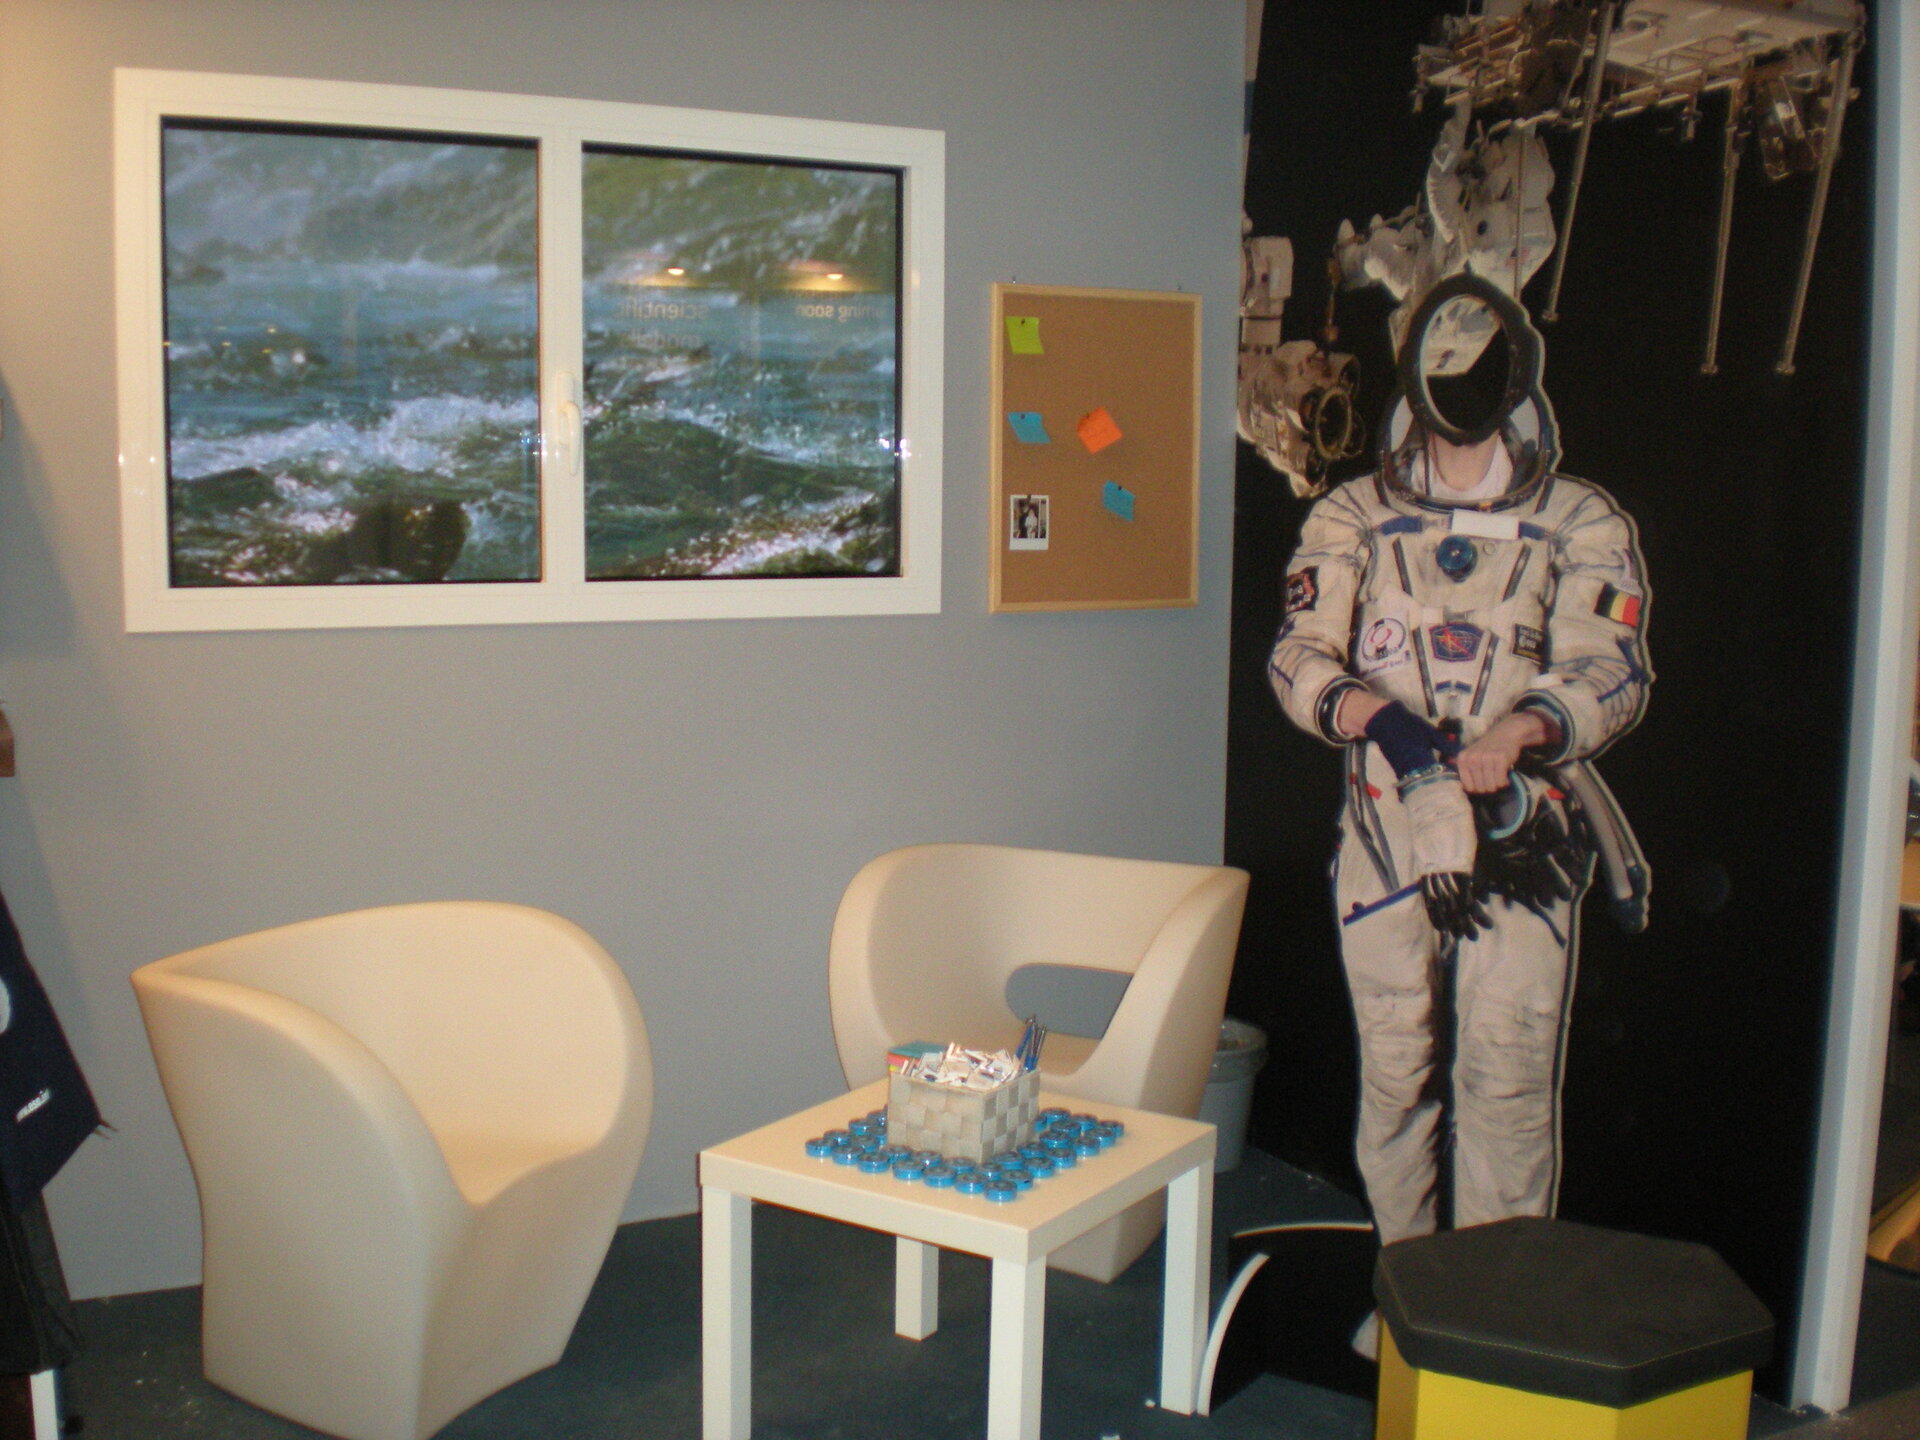 ESA's human spaceflight stand at the Ecsite 2009 Business Bistro